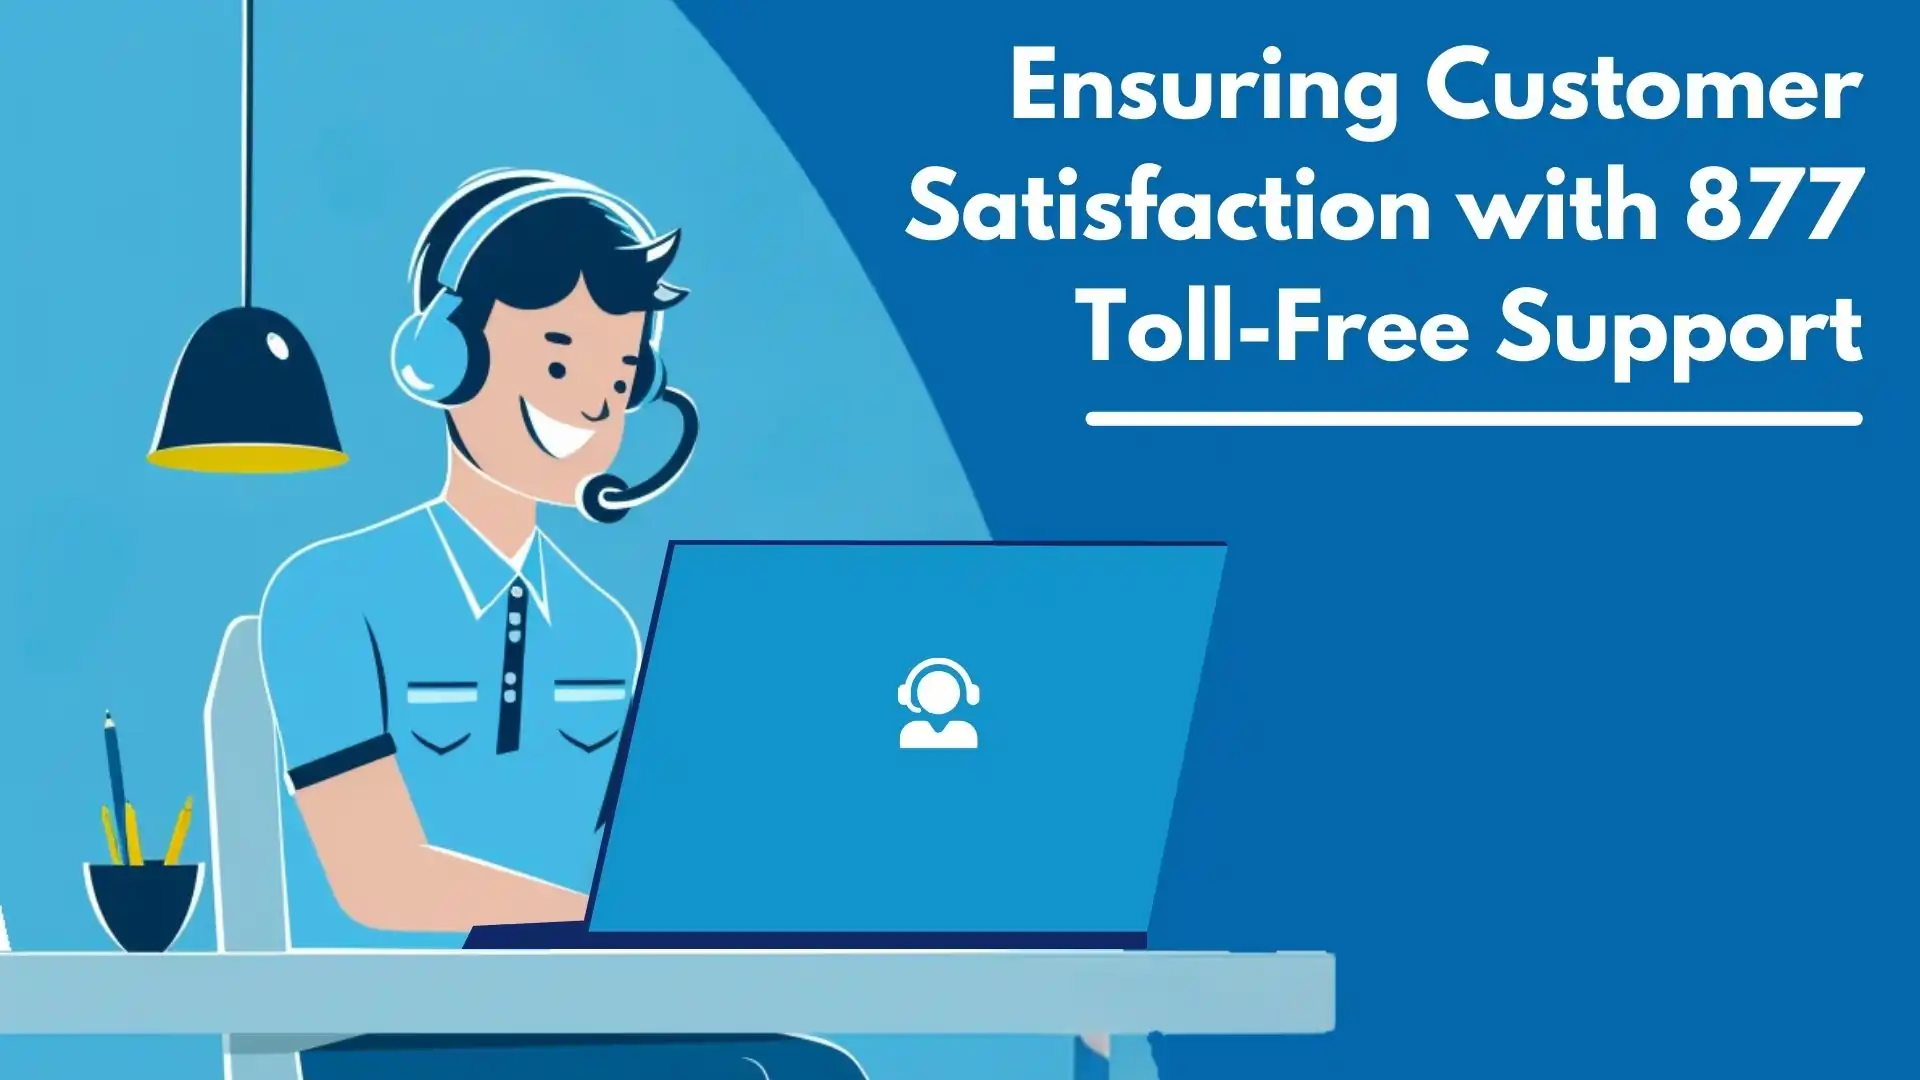 Ensuring Customer Satisfaction with 877 Toll-Free Support